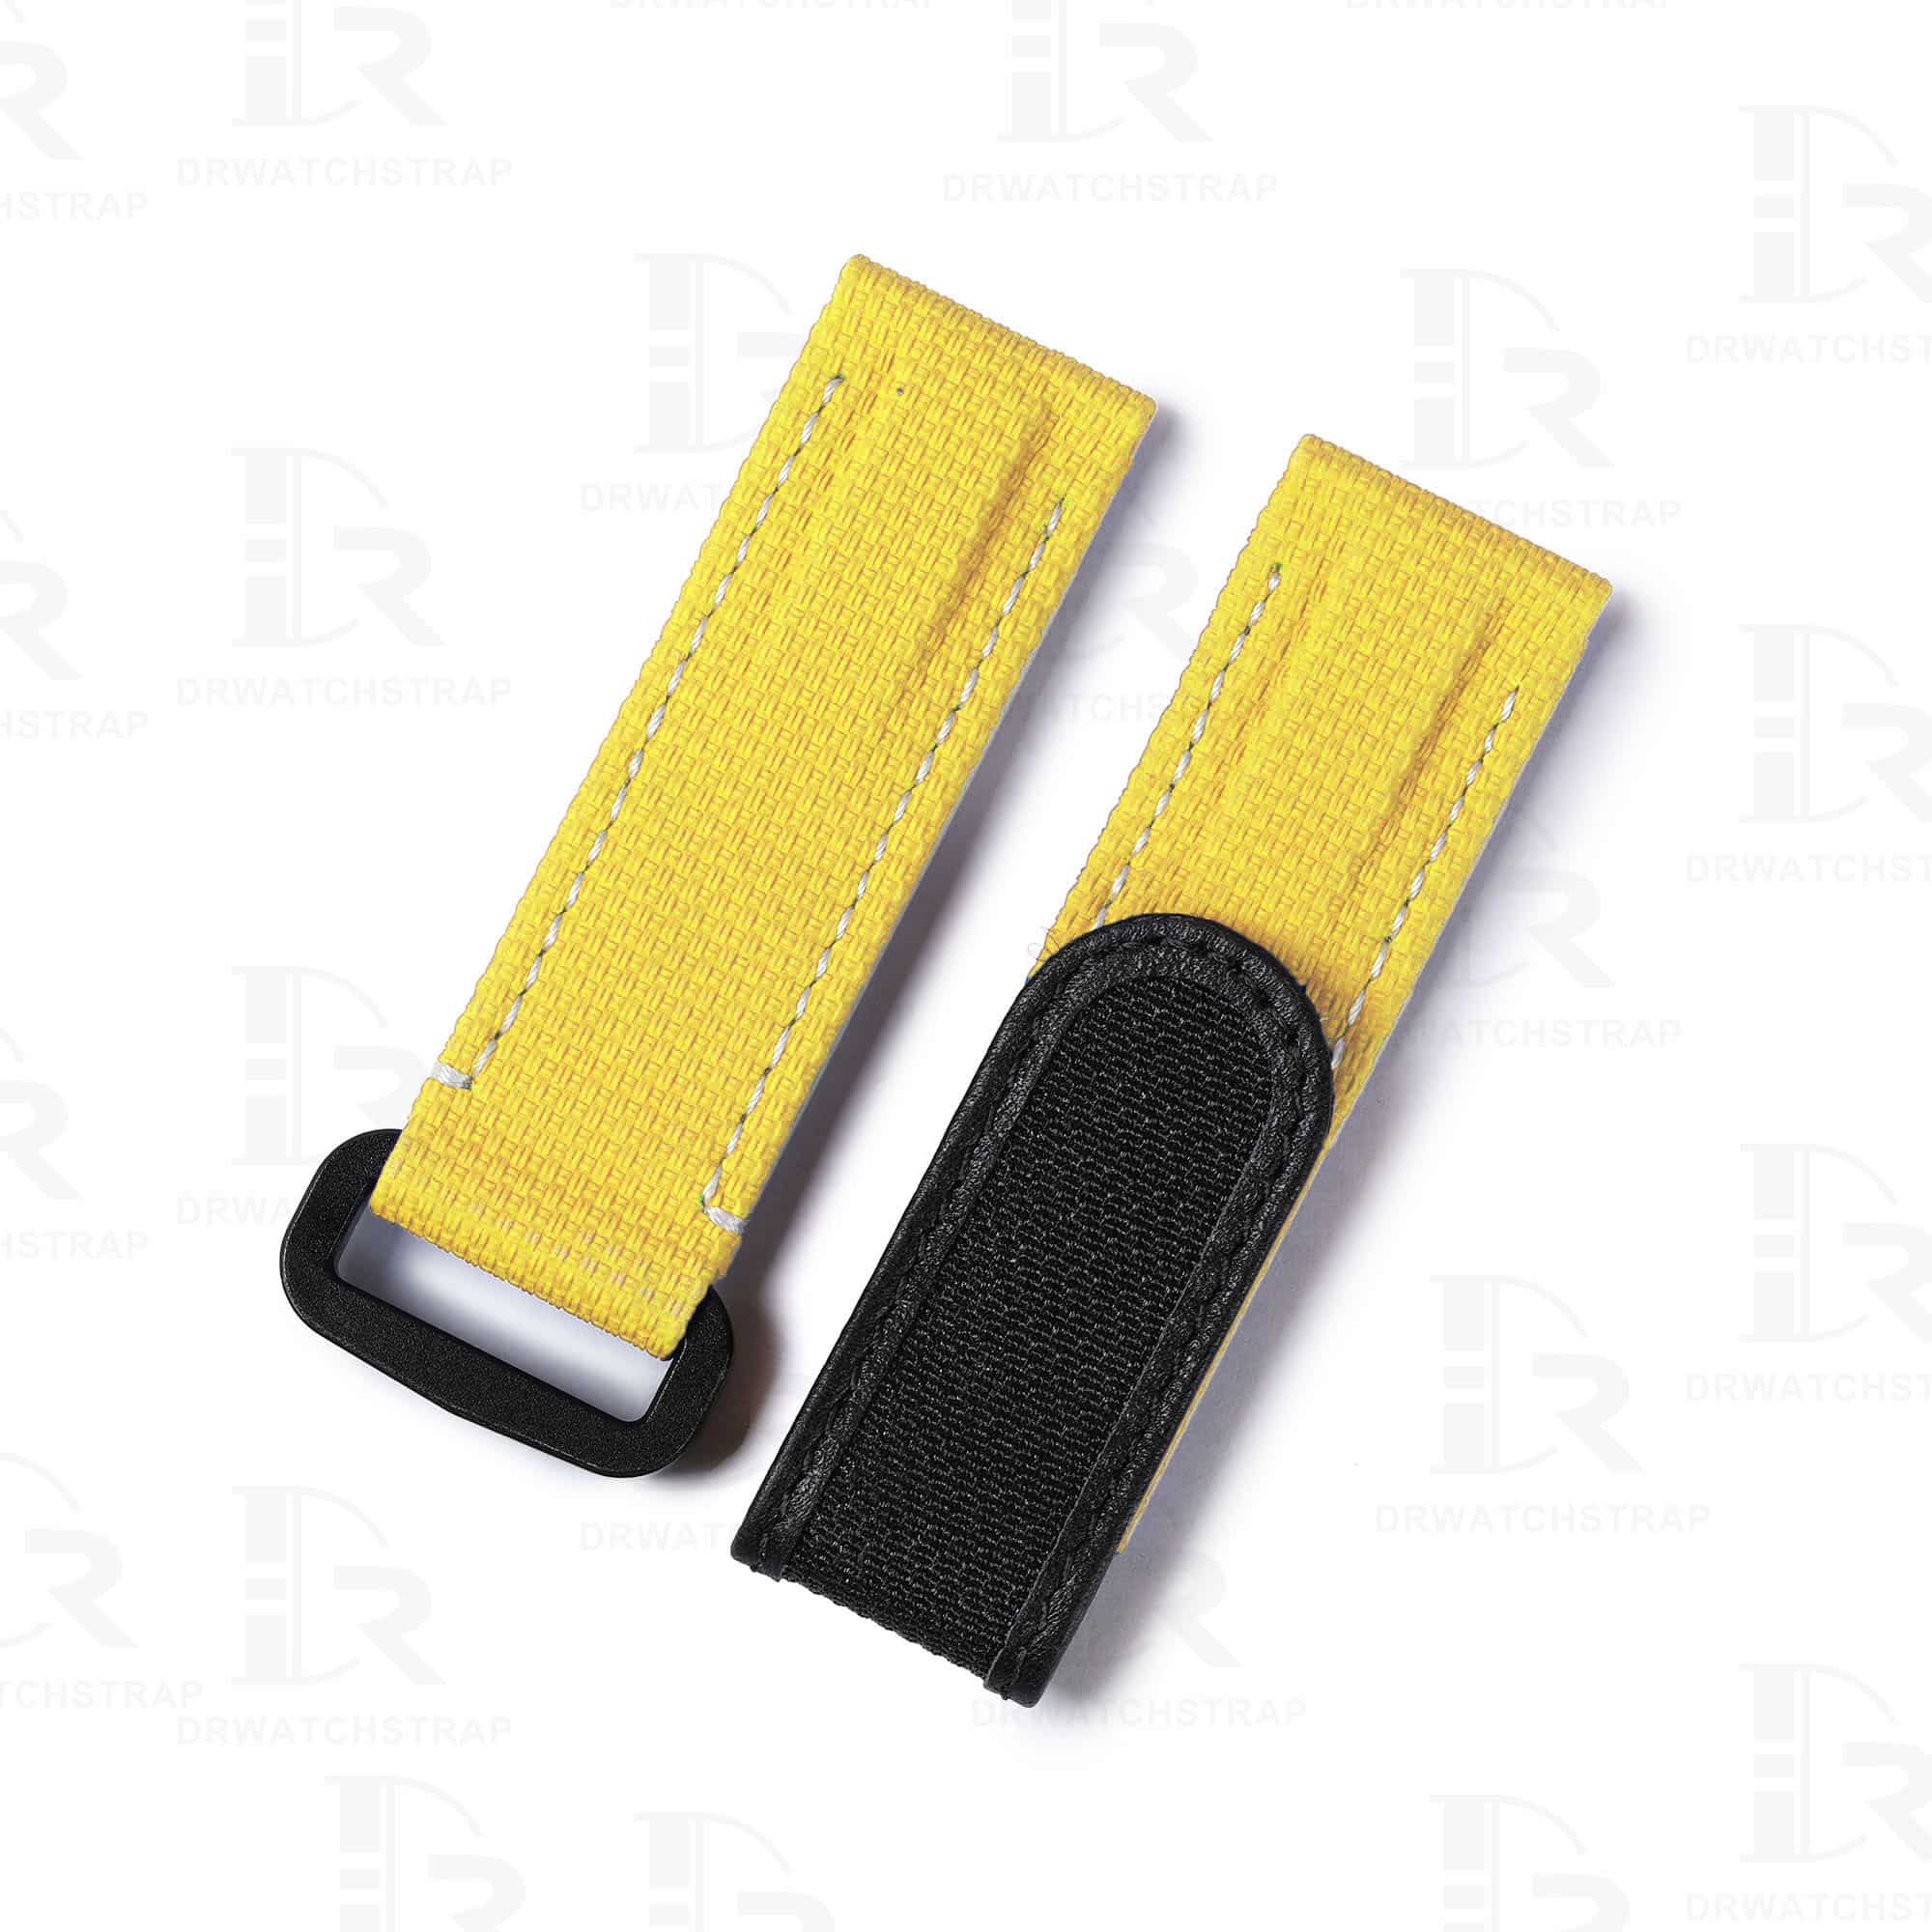 Custom best quality canvas yellow replacement velcro rubber watch strap and watch band online for Rolex, Blancpain, Omega, and any other man or women watches with flat ends watch bands replacement from DRwatchstrap at a low price